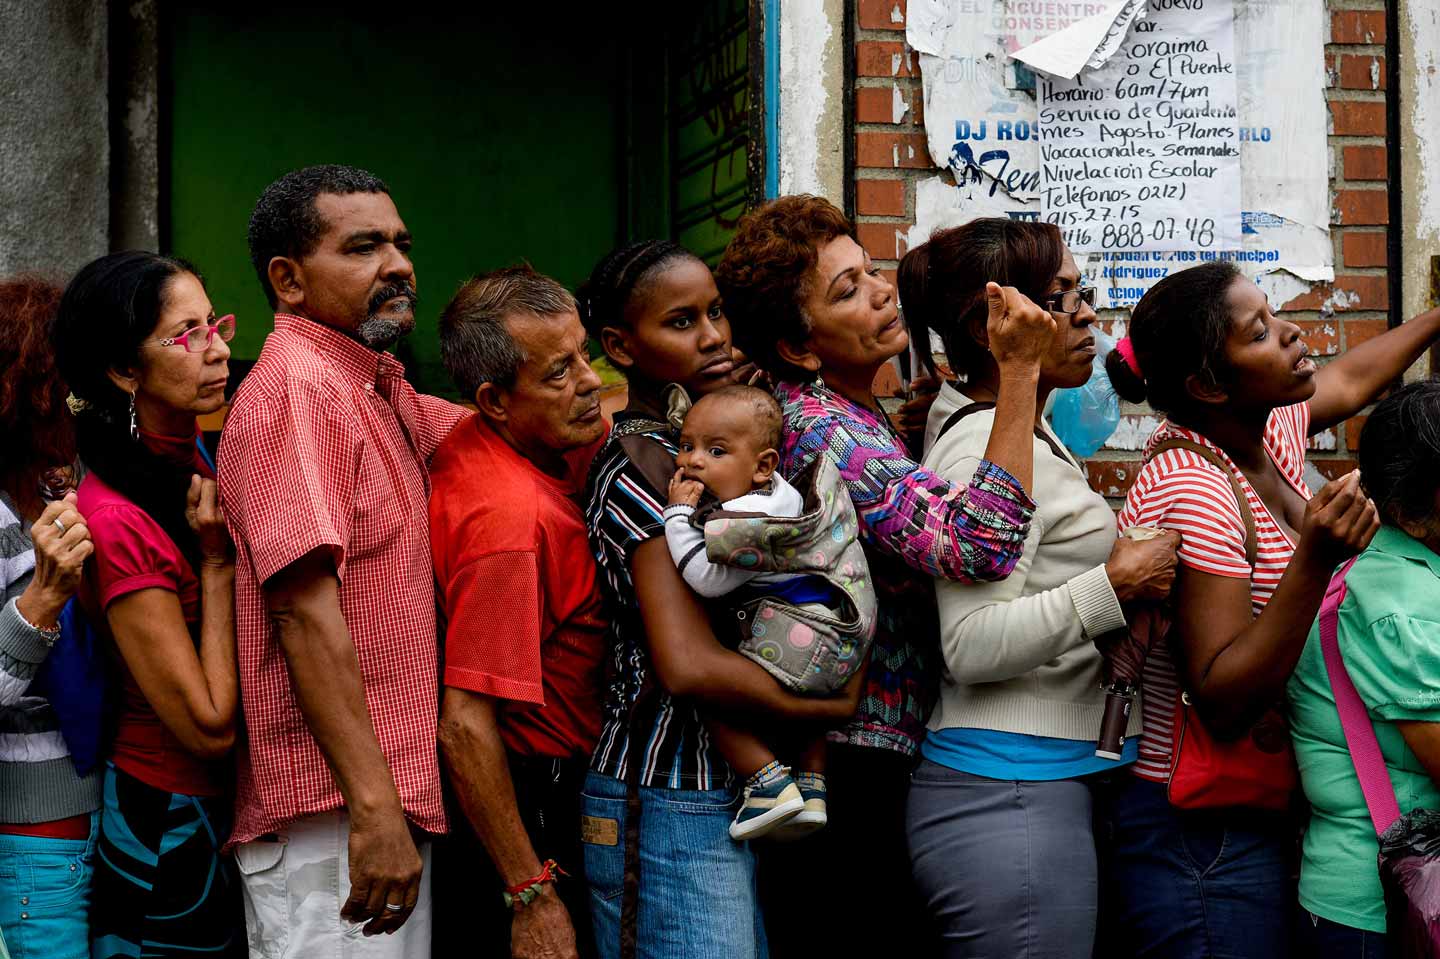 © Federico Parra. People queue up to buy food and basic household items in a supermarket at the Petare neighborhood in Caracas on July 16, 2016. The Venezuelan military began overseeing food distribution at ports, airports and businesses as part of a plan by President Nicolas Maduro to alleviate acute shortages plaguing the country.